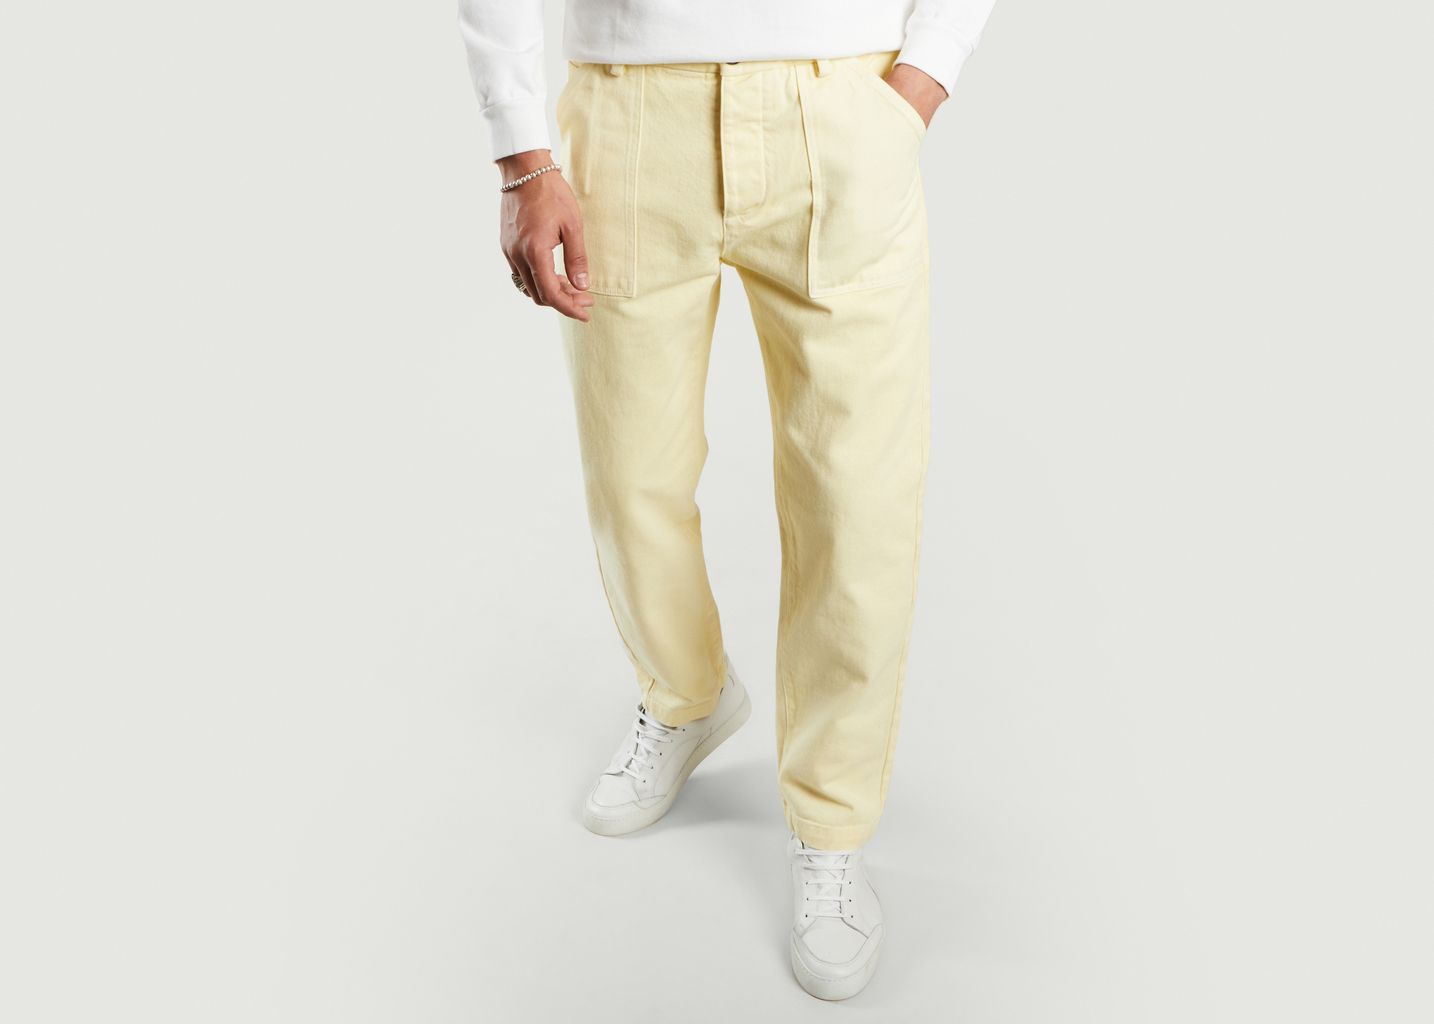 Cuisse de Grenouille Fitted Organic Cotton Chino Pants With Pockets